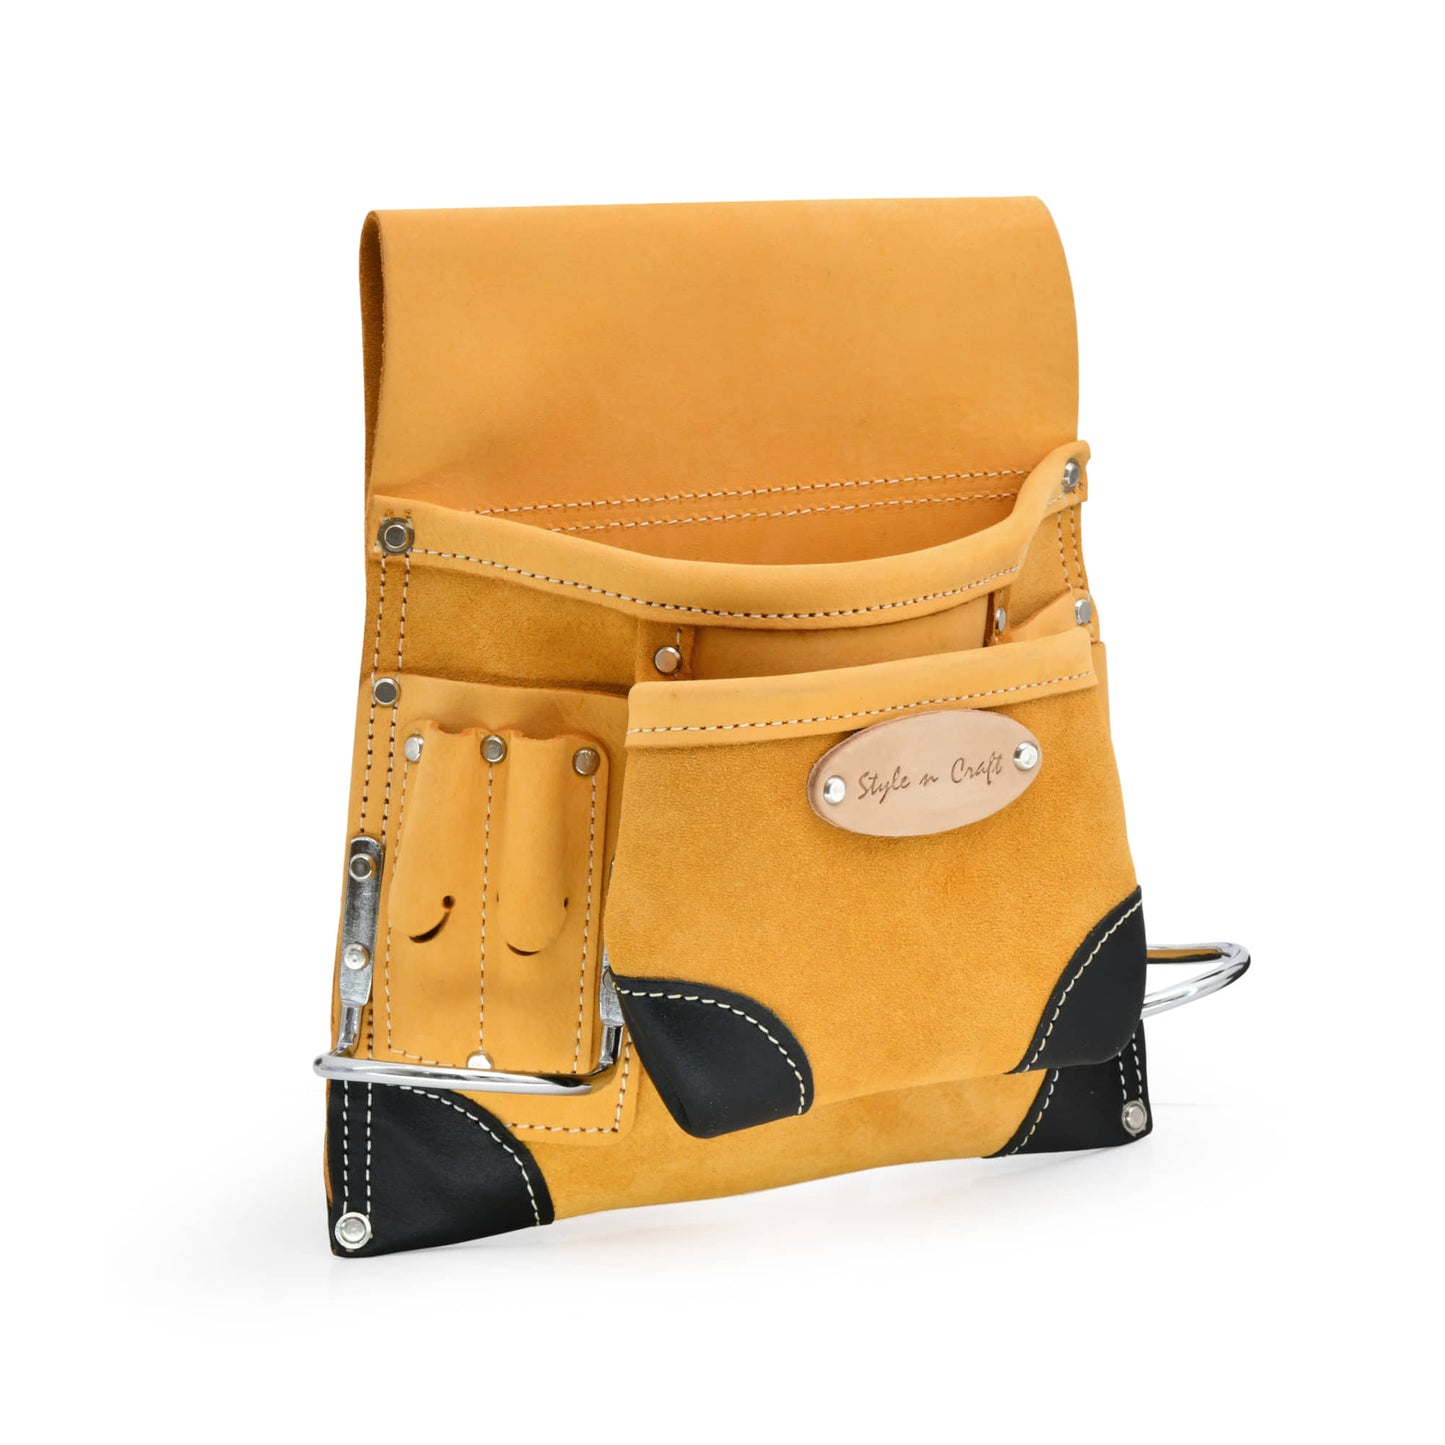 Style n Craft's 93823 - 8 Pocket Carpenter's Nail & Tool Pouch in Yellow Full Grain Leather with Reinforced Corners - Front Angled View